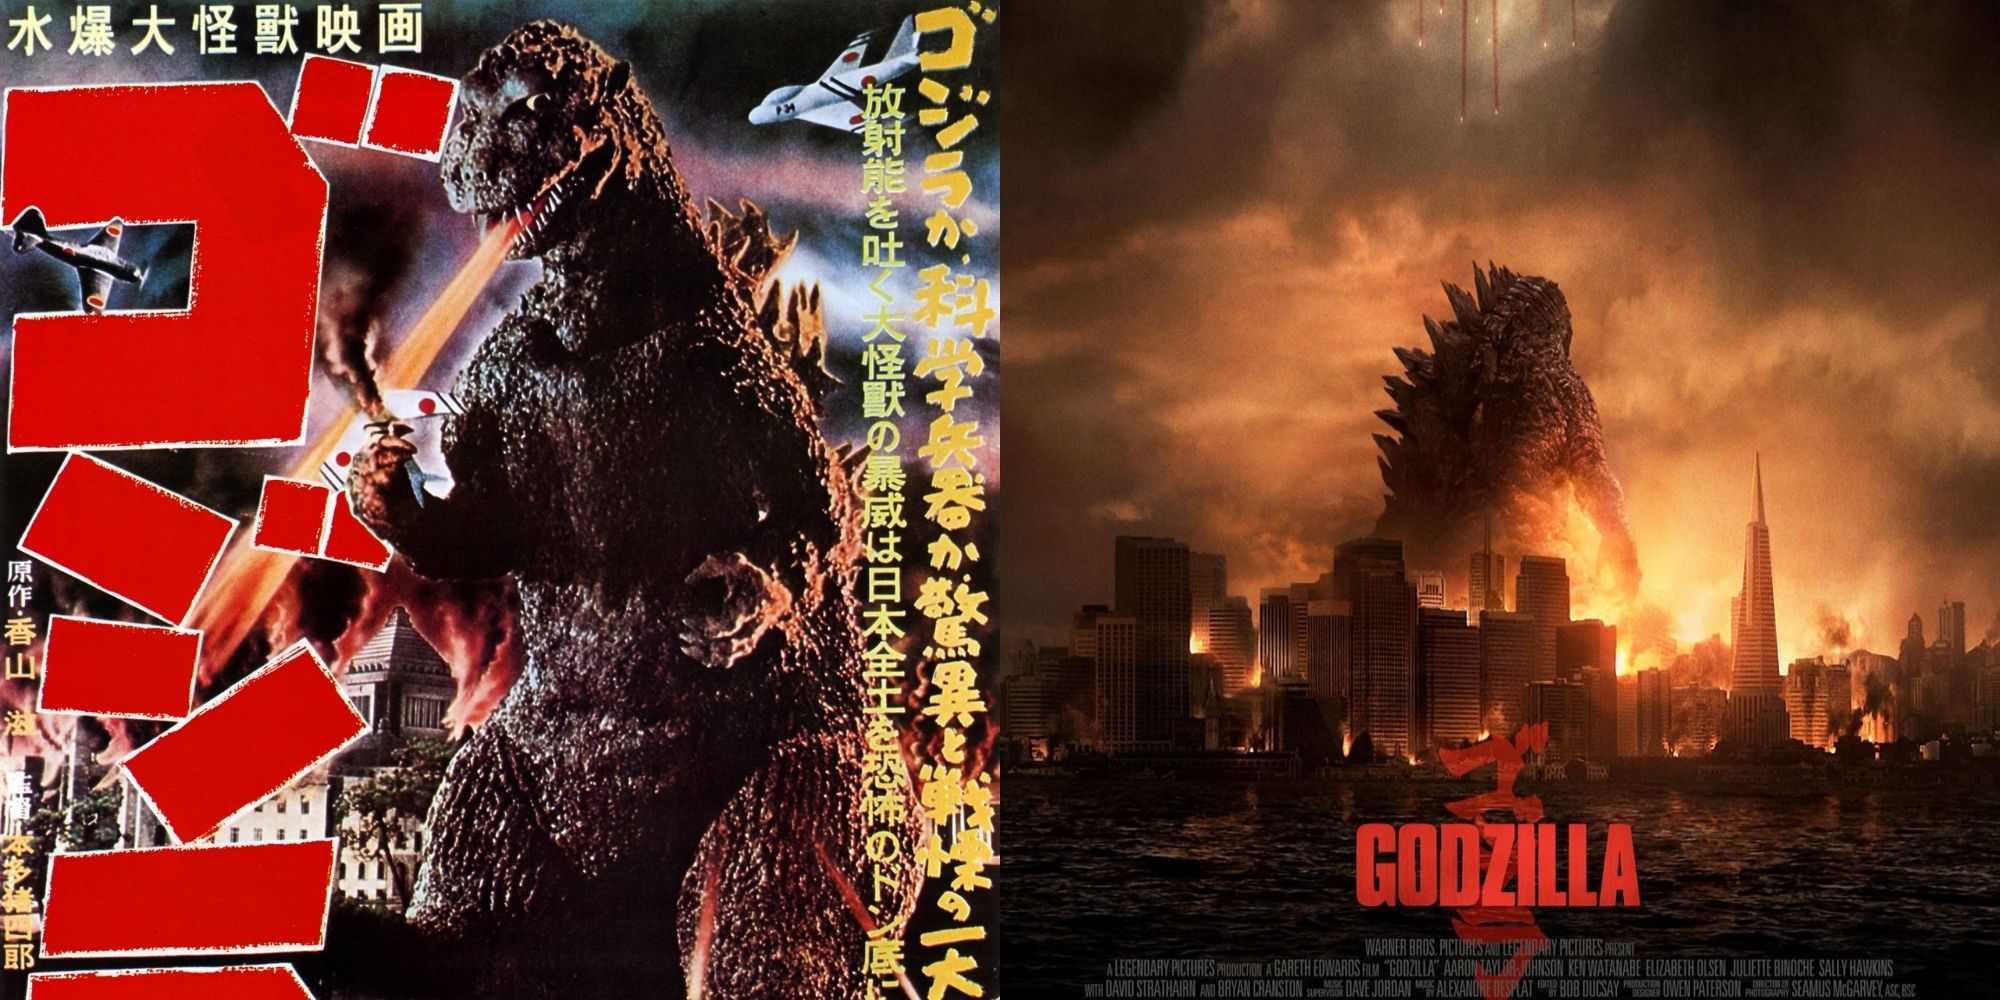 Gojira poster on the left and Godzilla poster on the right